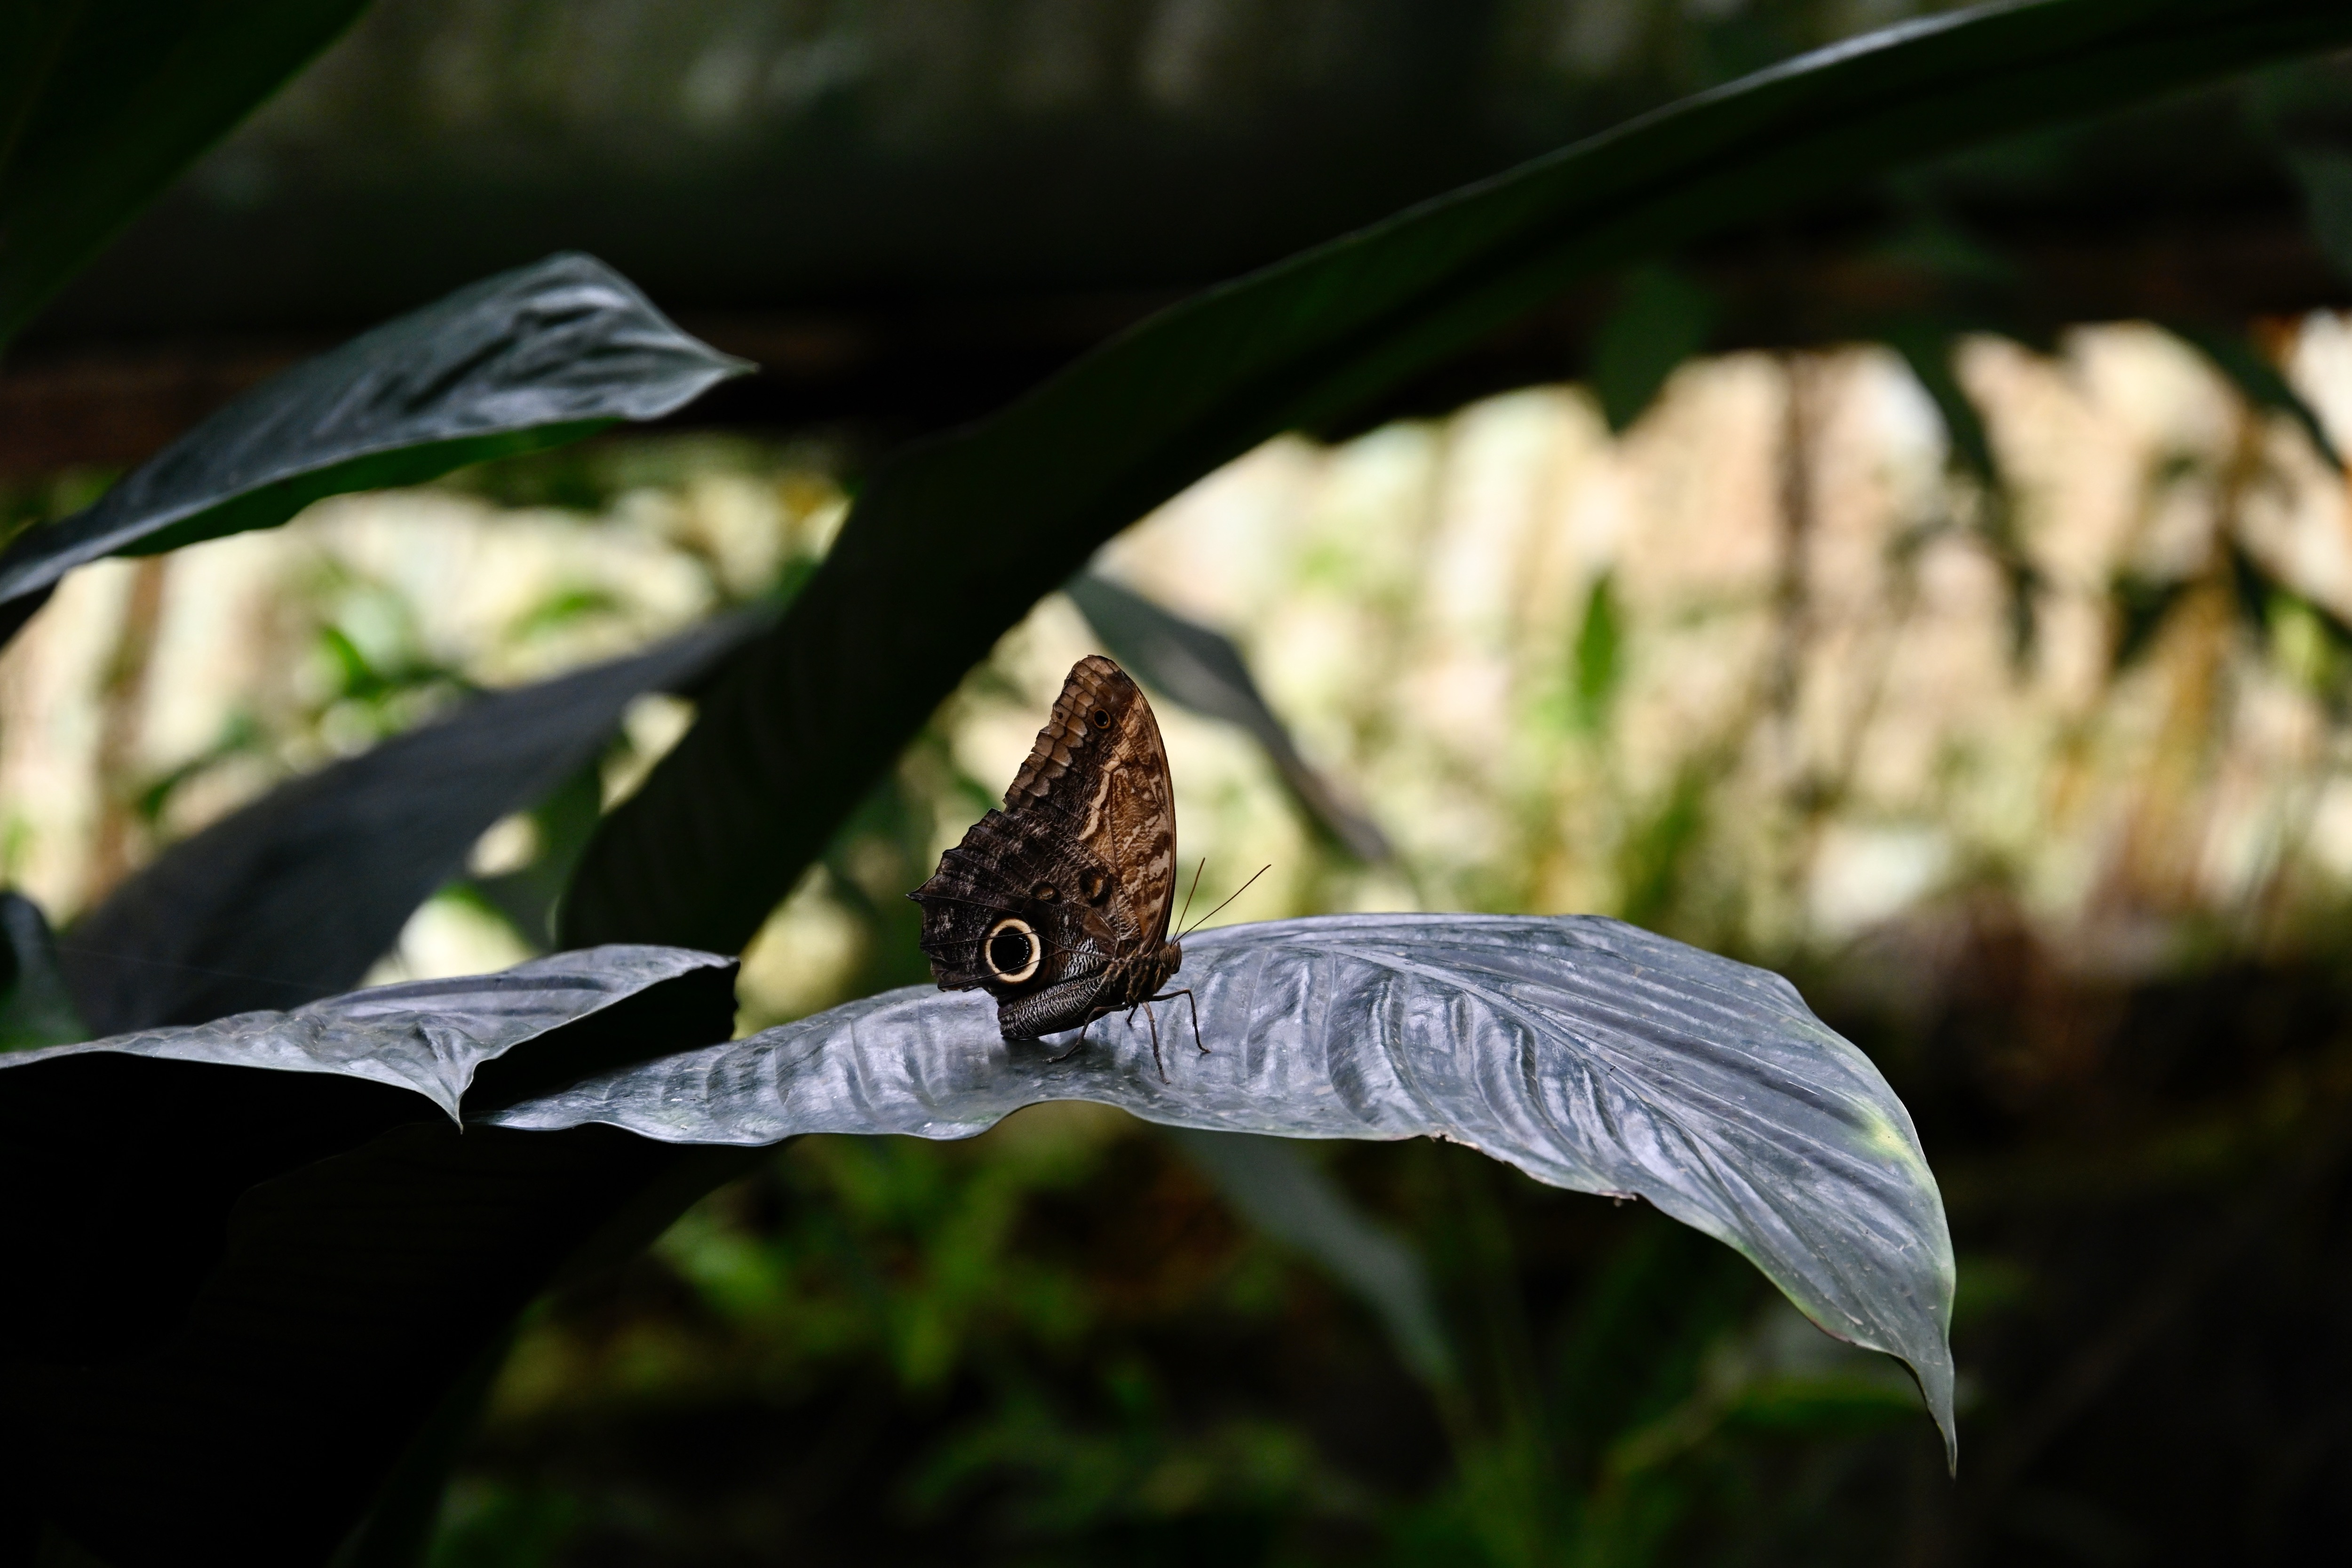 Caligo memnon, also known as the Owl Butterfly, perched on a leaf in Aventura Park, showcasing its eyespots on the wings.